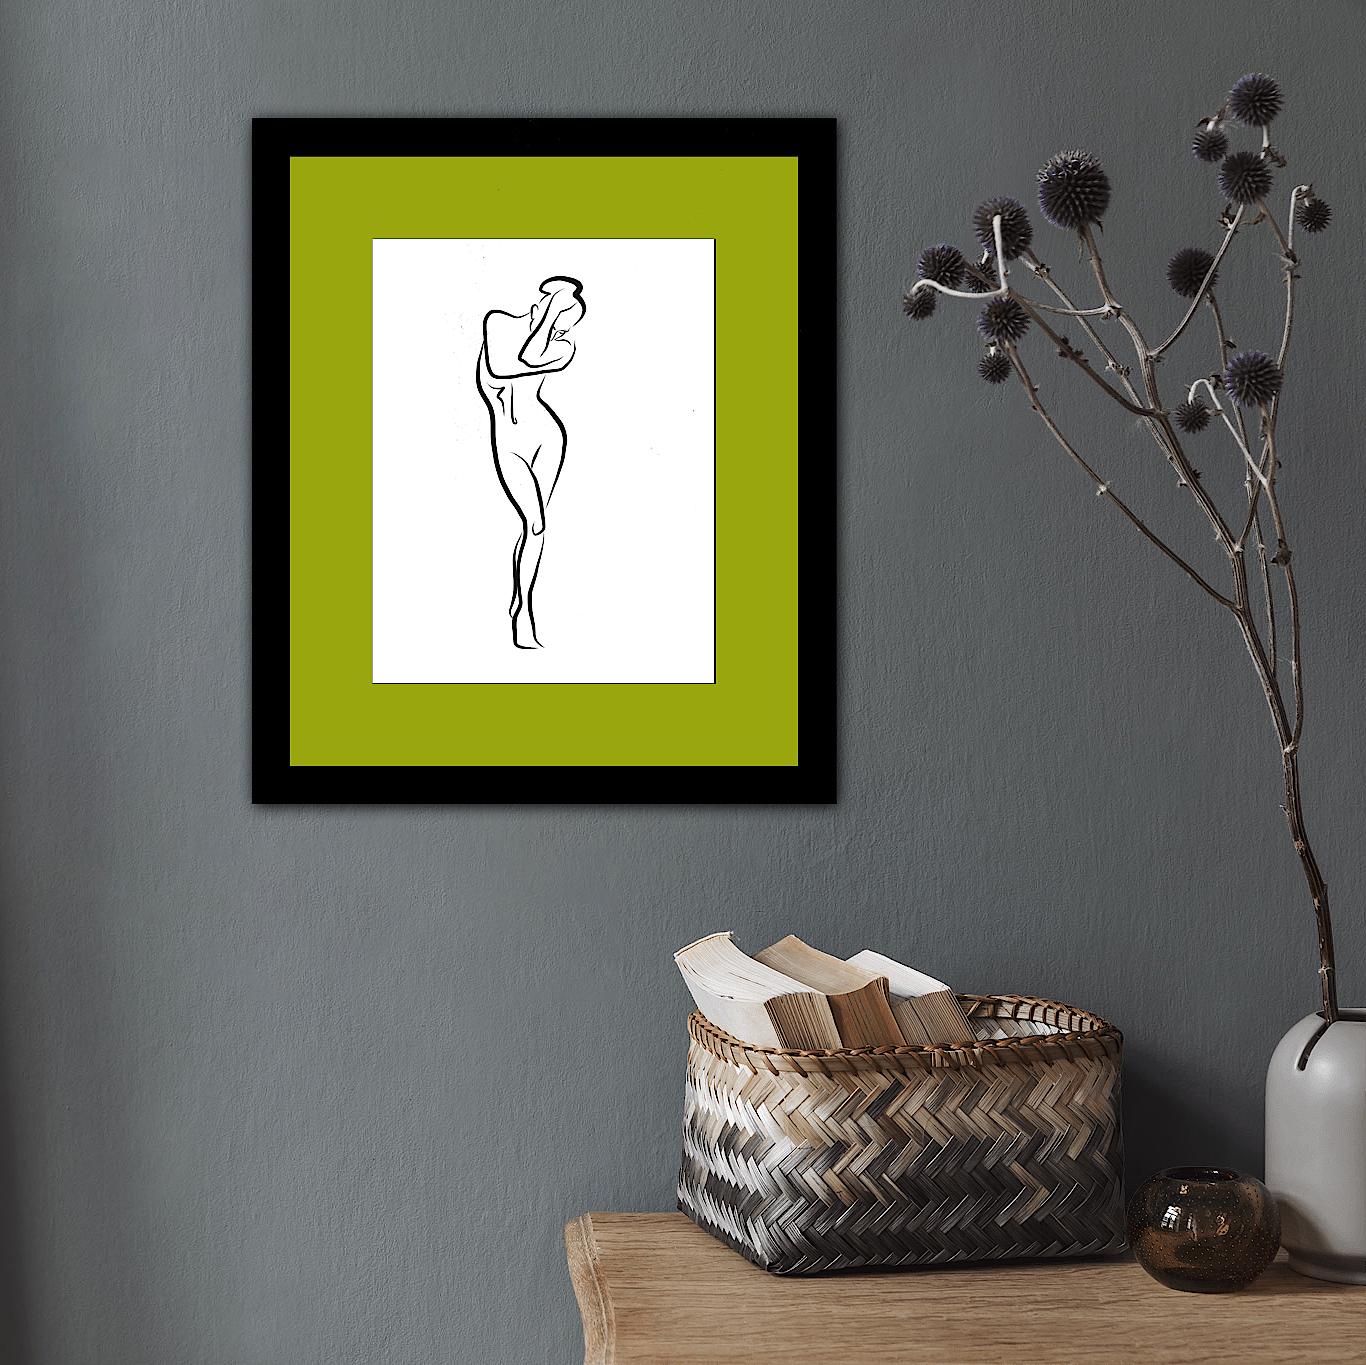 Haiku #26 - Digital Vector Drawing Shy Standing Female Nude Woman Figure

This is a limited edition (50) digital black & white print of a standing female nude, executed in 17 vector lines. It is part of a series called Haiku, after the style of